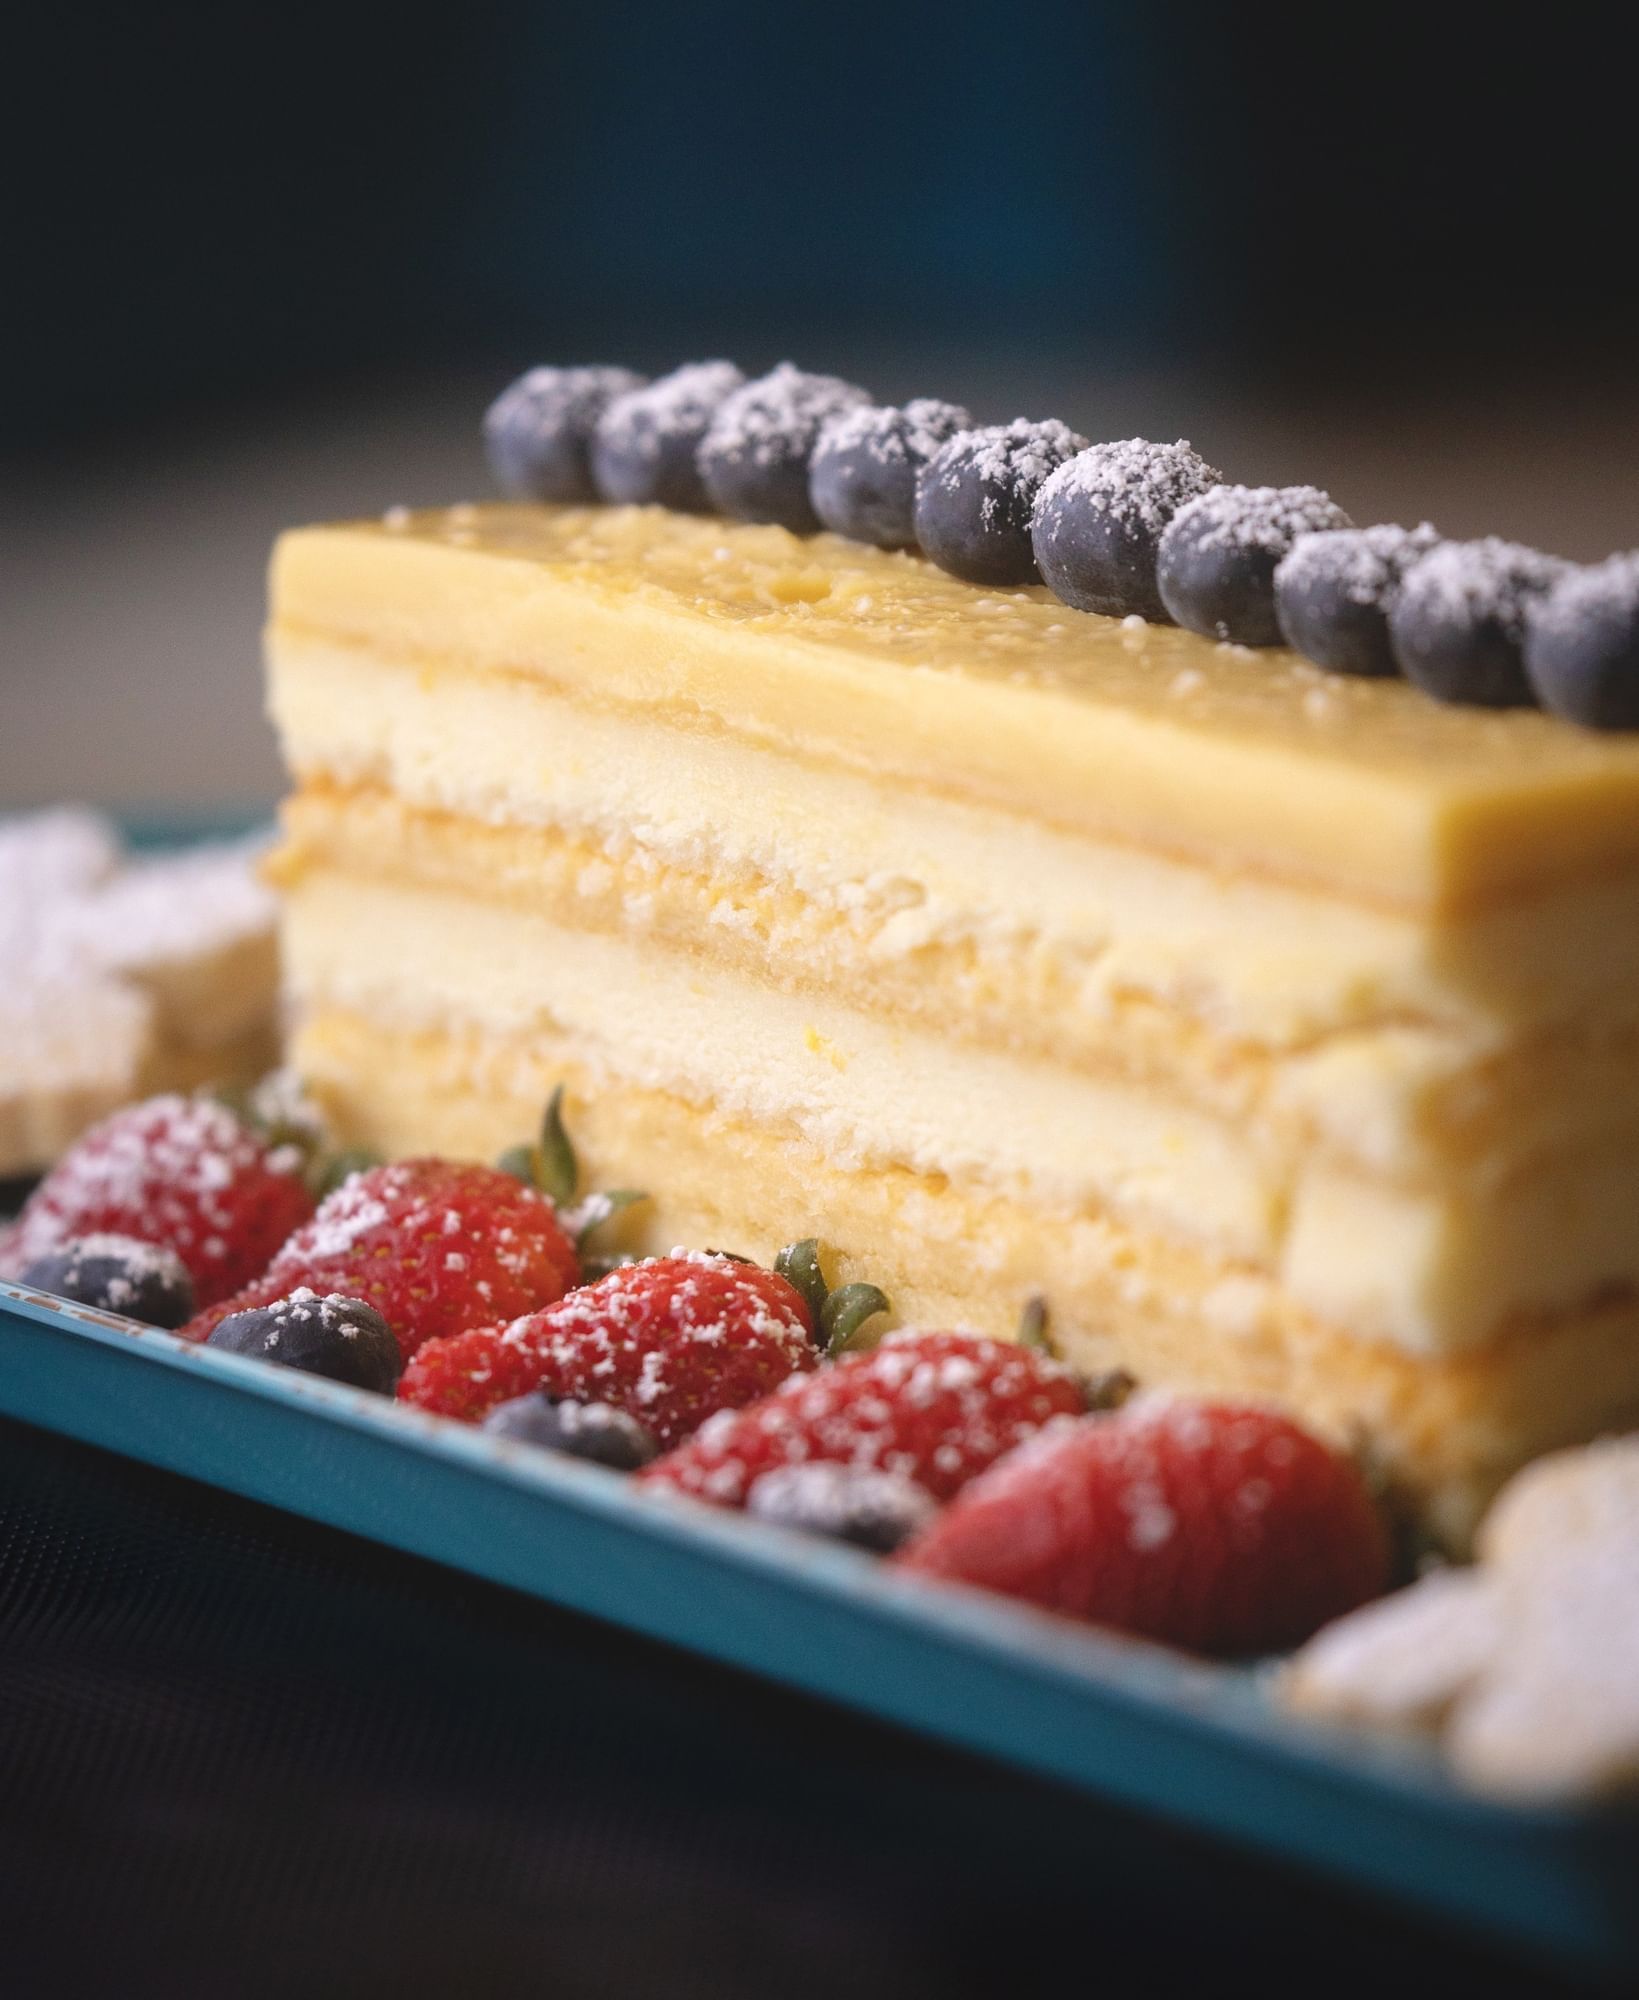 A plated rectangular slice of lemon cake with bluberries lined along the top and strawberries on the side